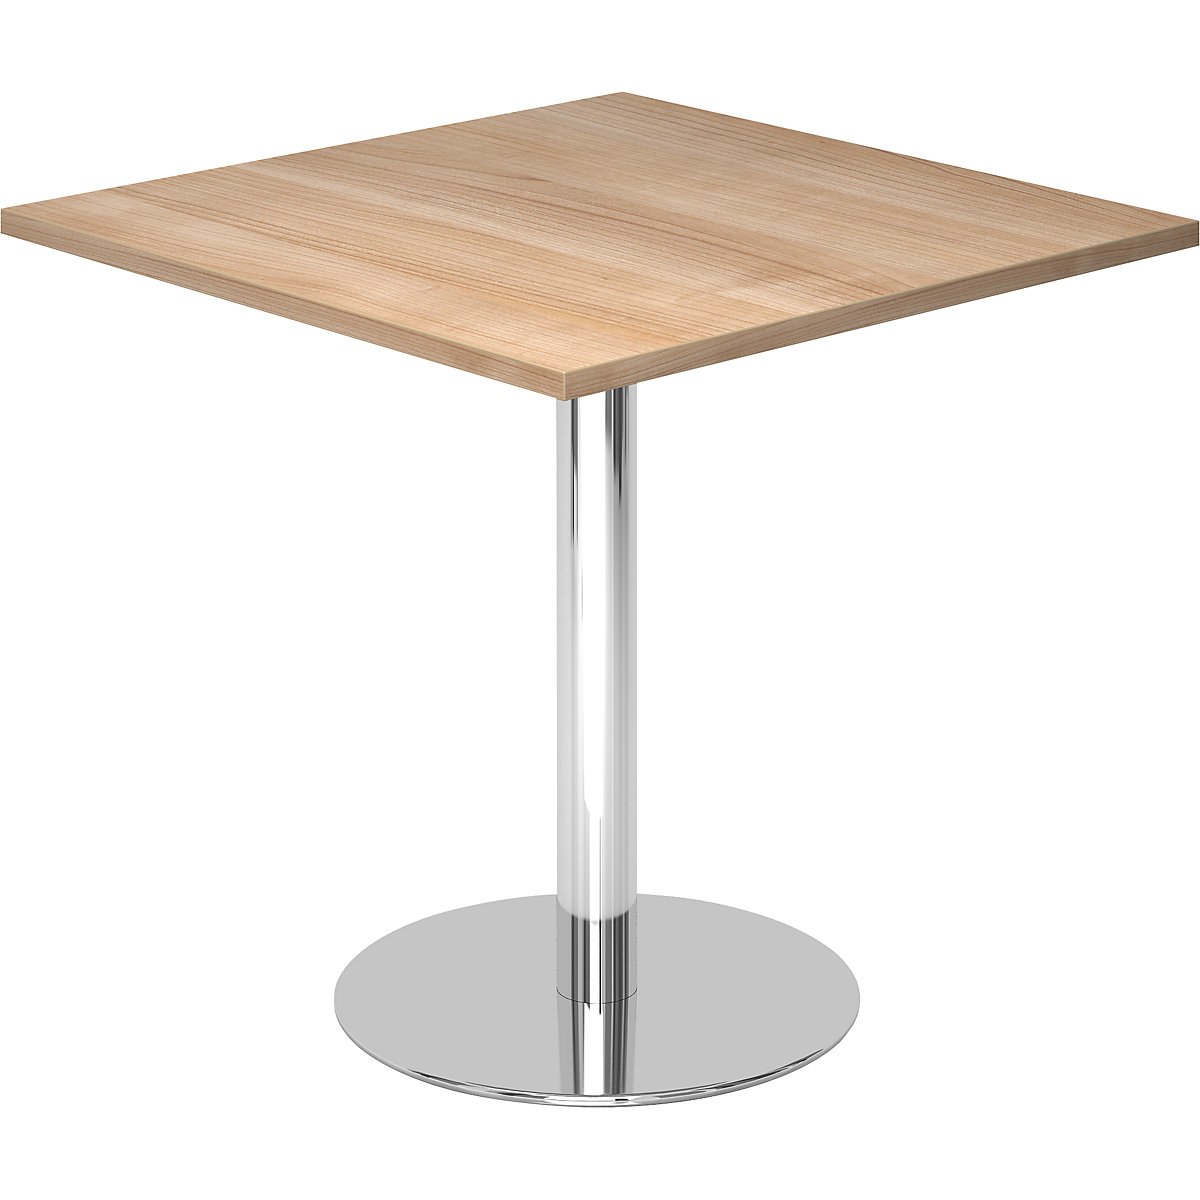 Conference table, LxW 800 x 800 mm, 755 mm high, chrome plated frame, tabletop in walnut finish-6